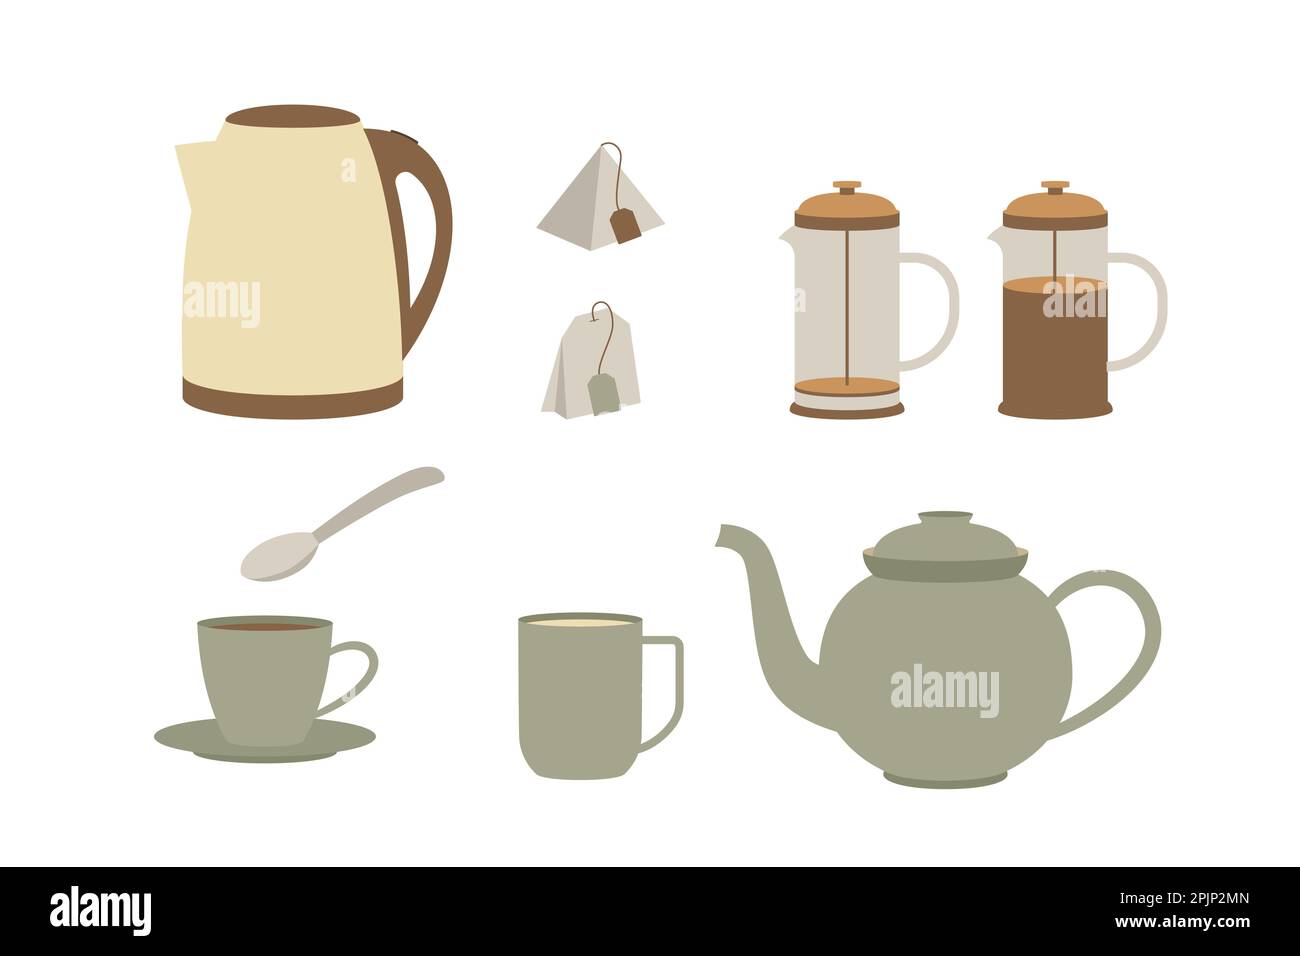 Set of appliances for tea brewing and drinking. Kettle, brewer, teapot, mug and cup. Empty and full french press. Flat vector illustration Stock Vector